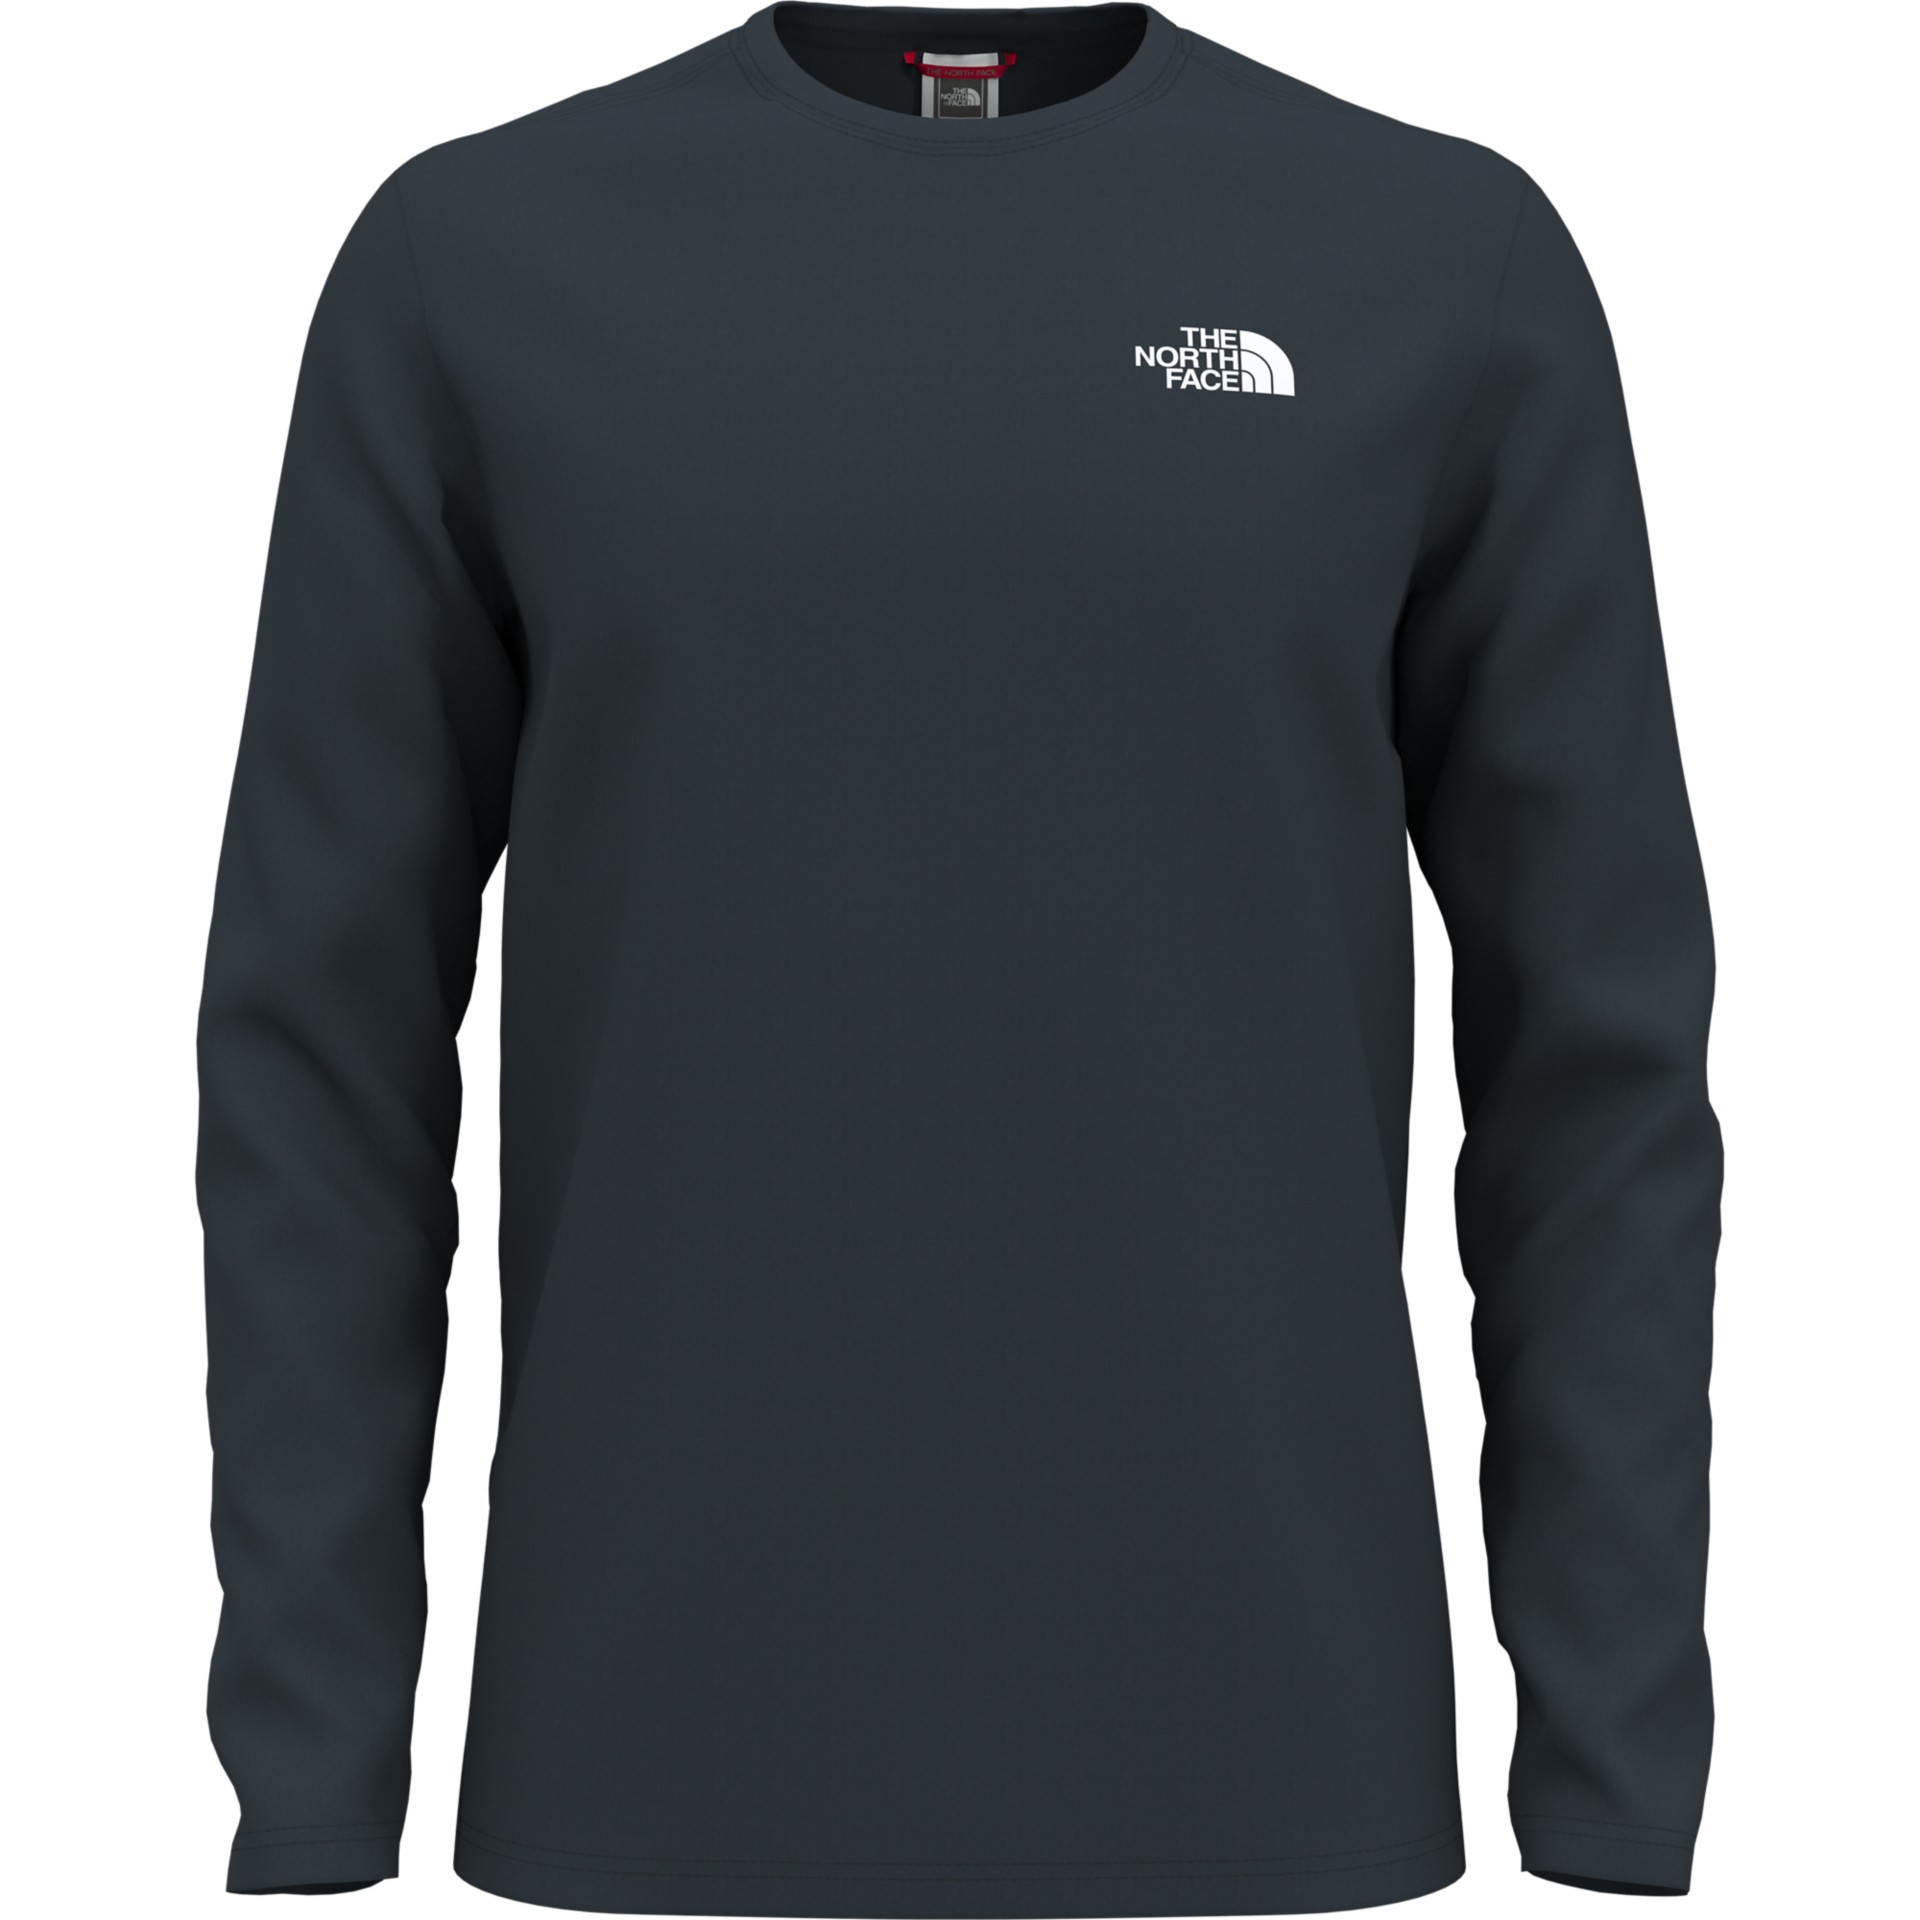 The North Face  The North Face - T-shirt Noir Manches Longues